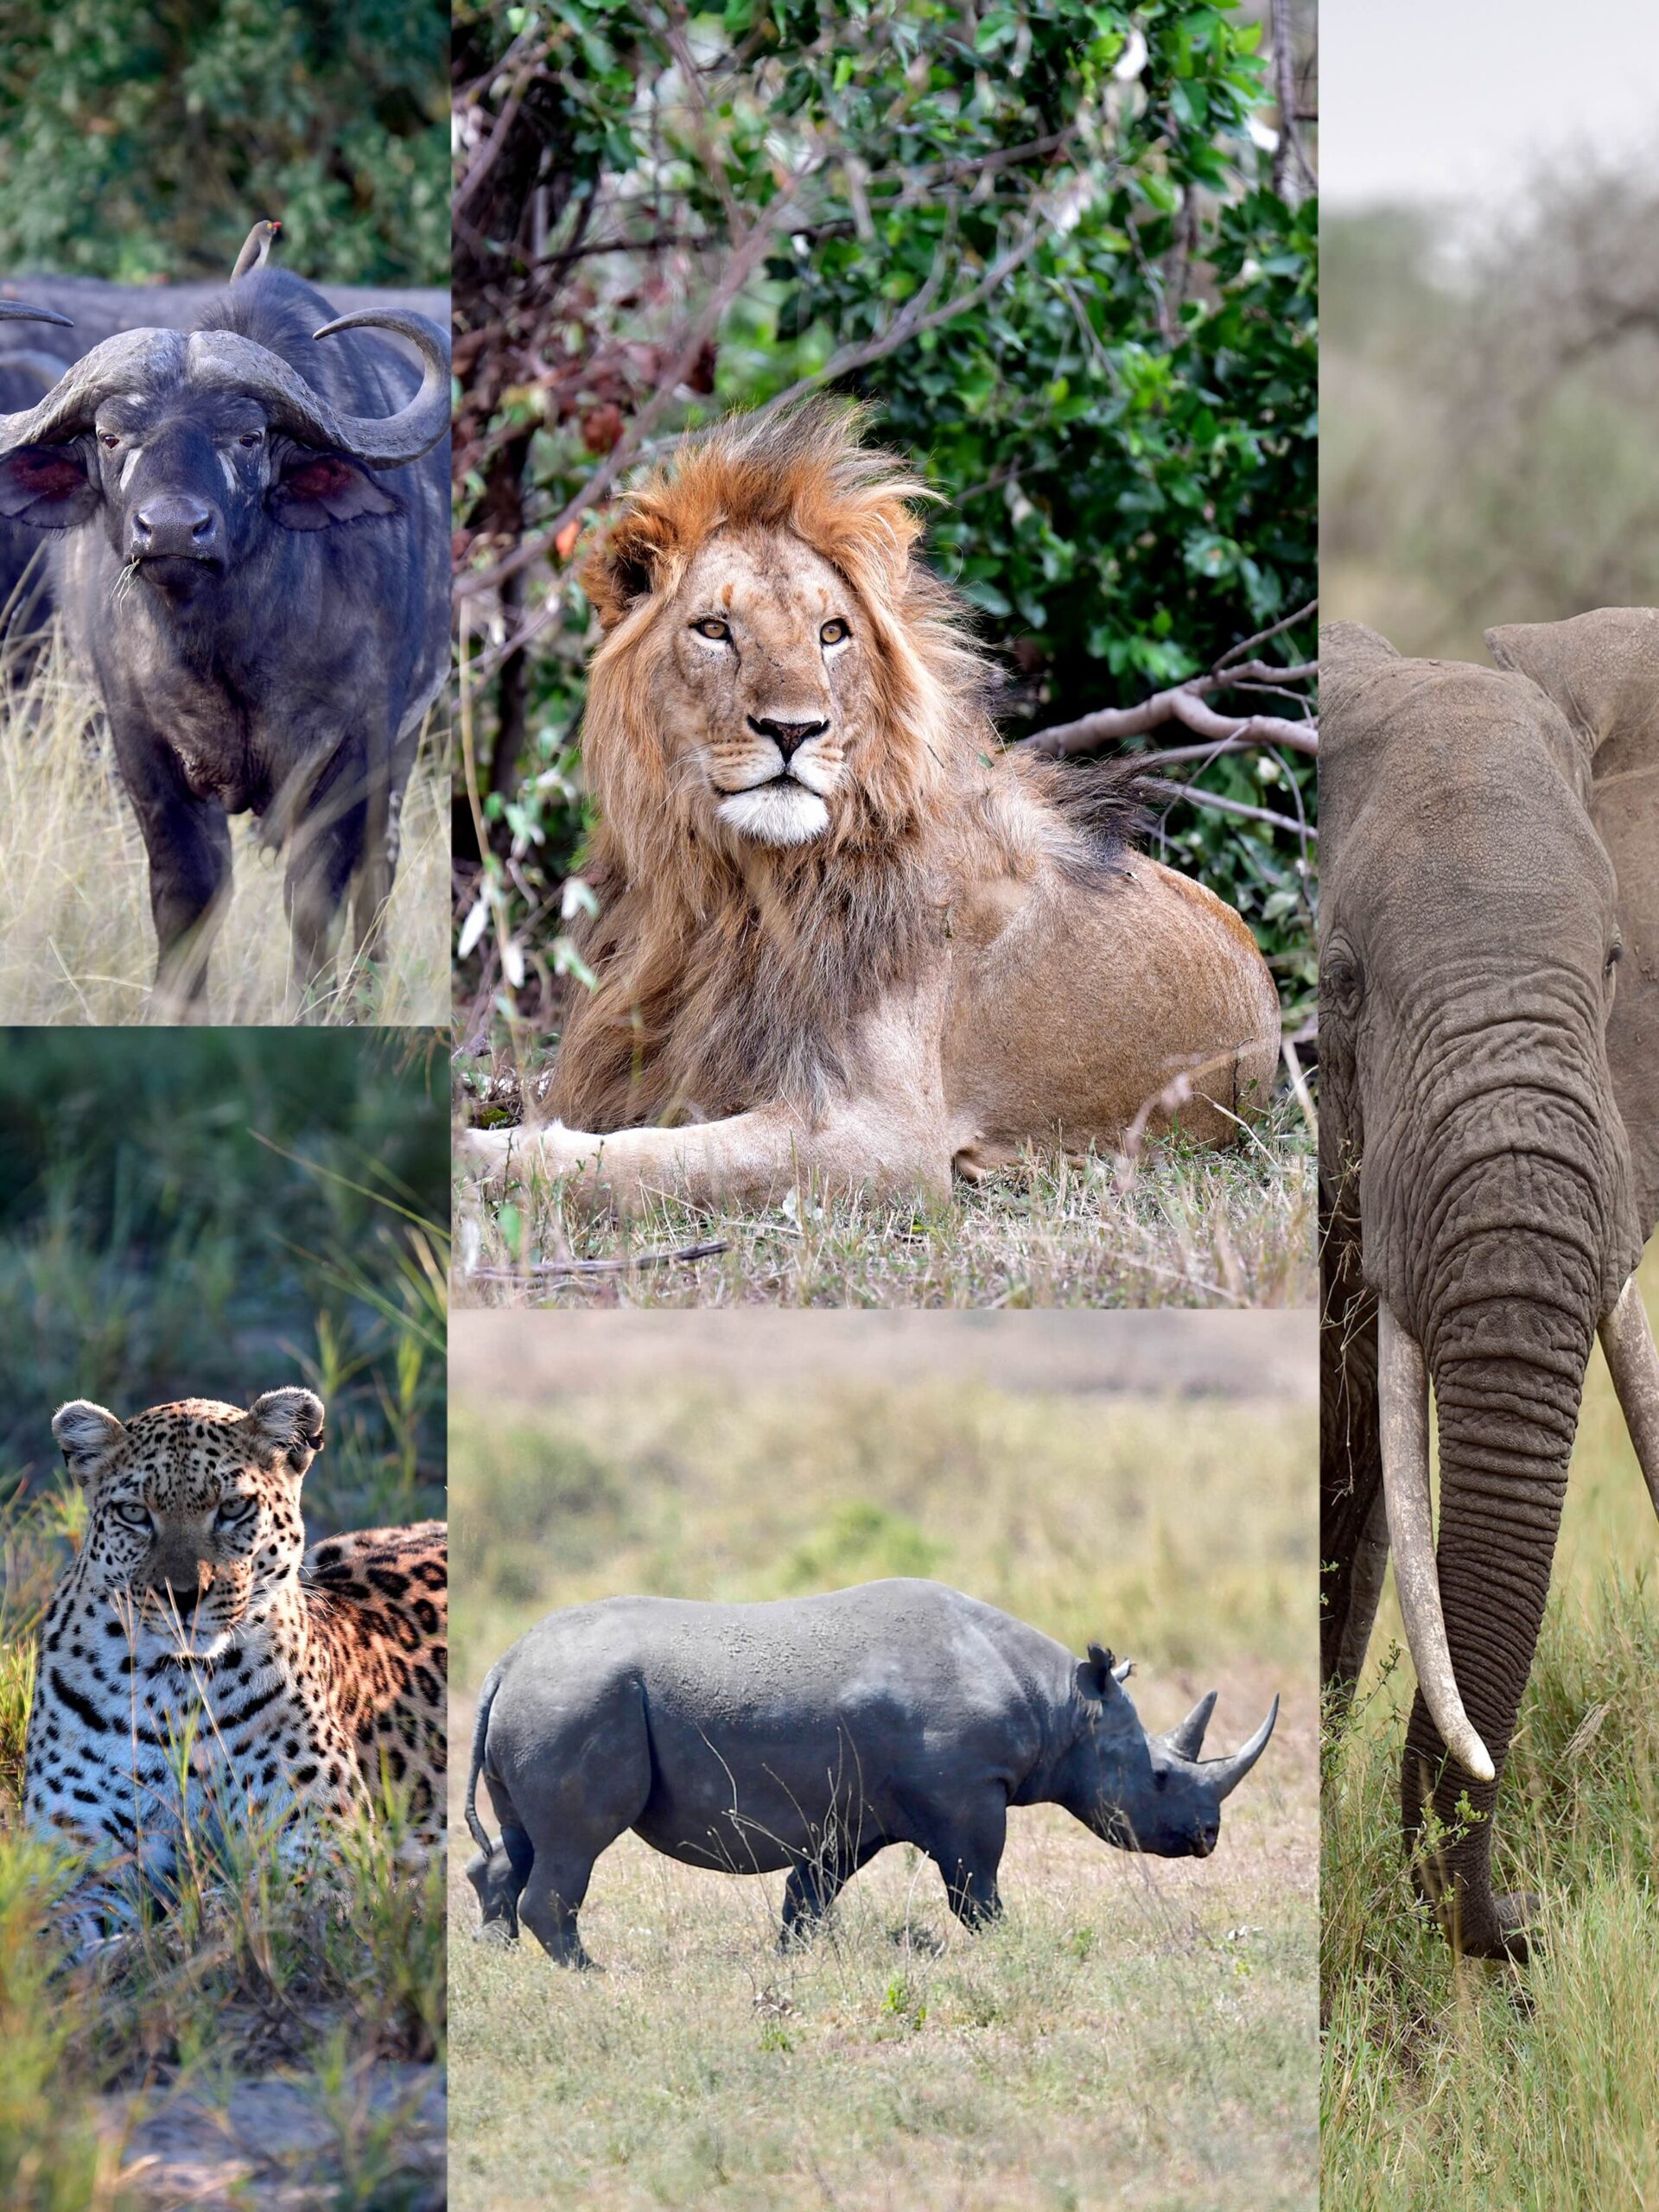 The Big 5 of Africa consists of the African lion, leopard, elephant, rhinoceros, and cape buffalo.